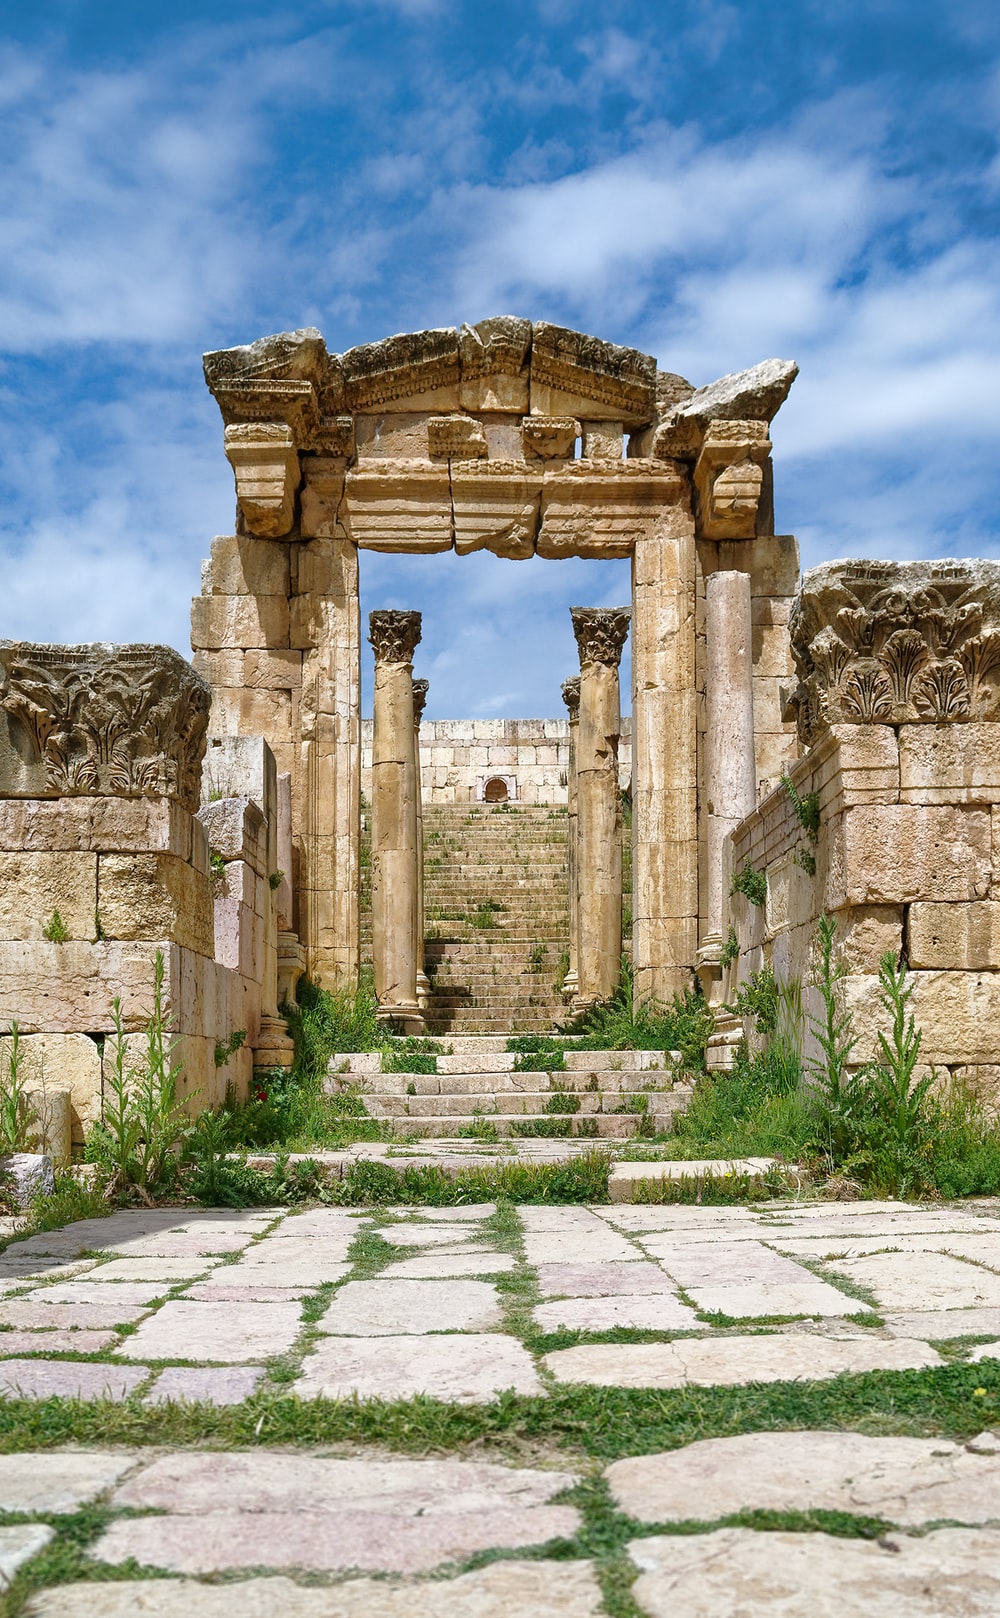 Ancient Ruins Pictures Download Free Images on